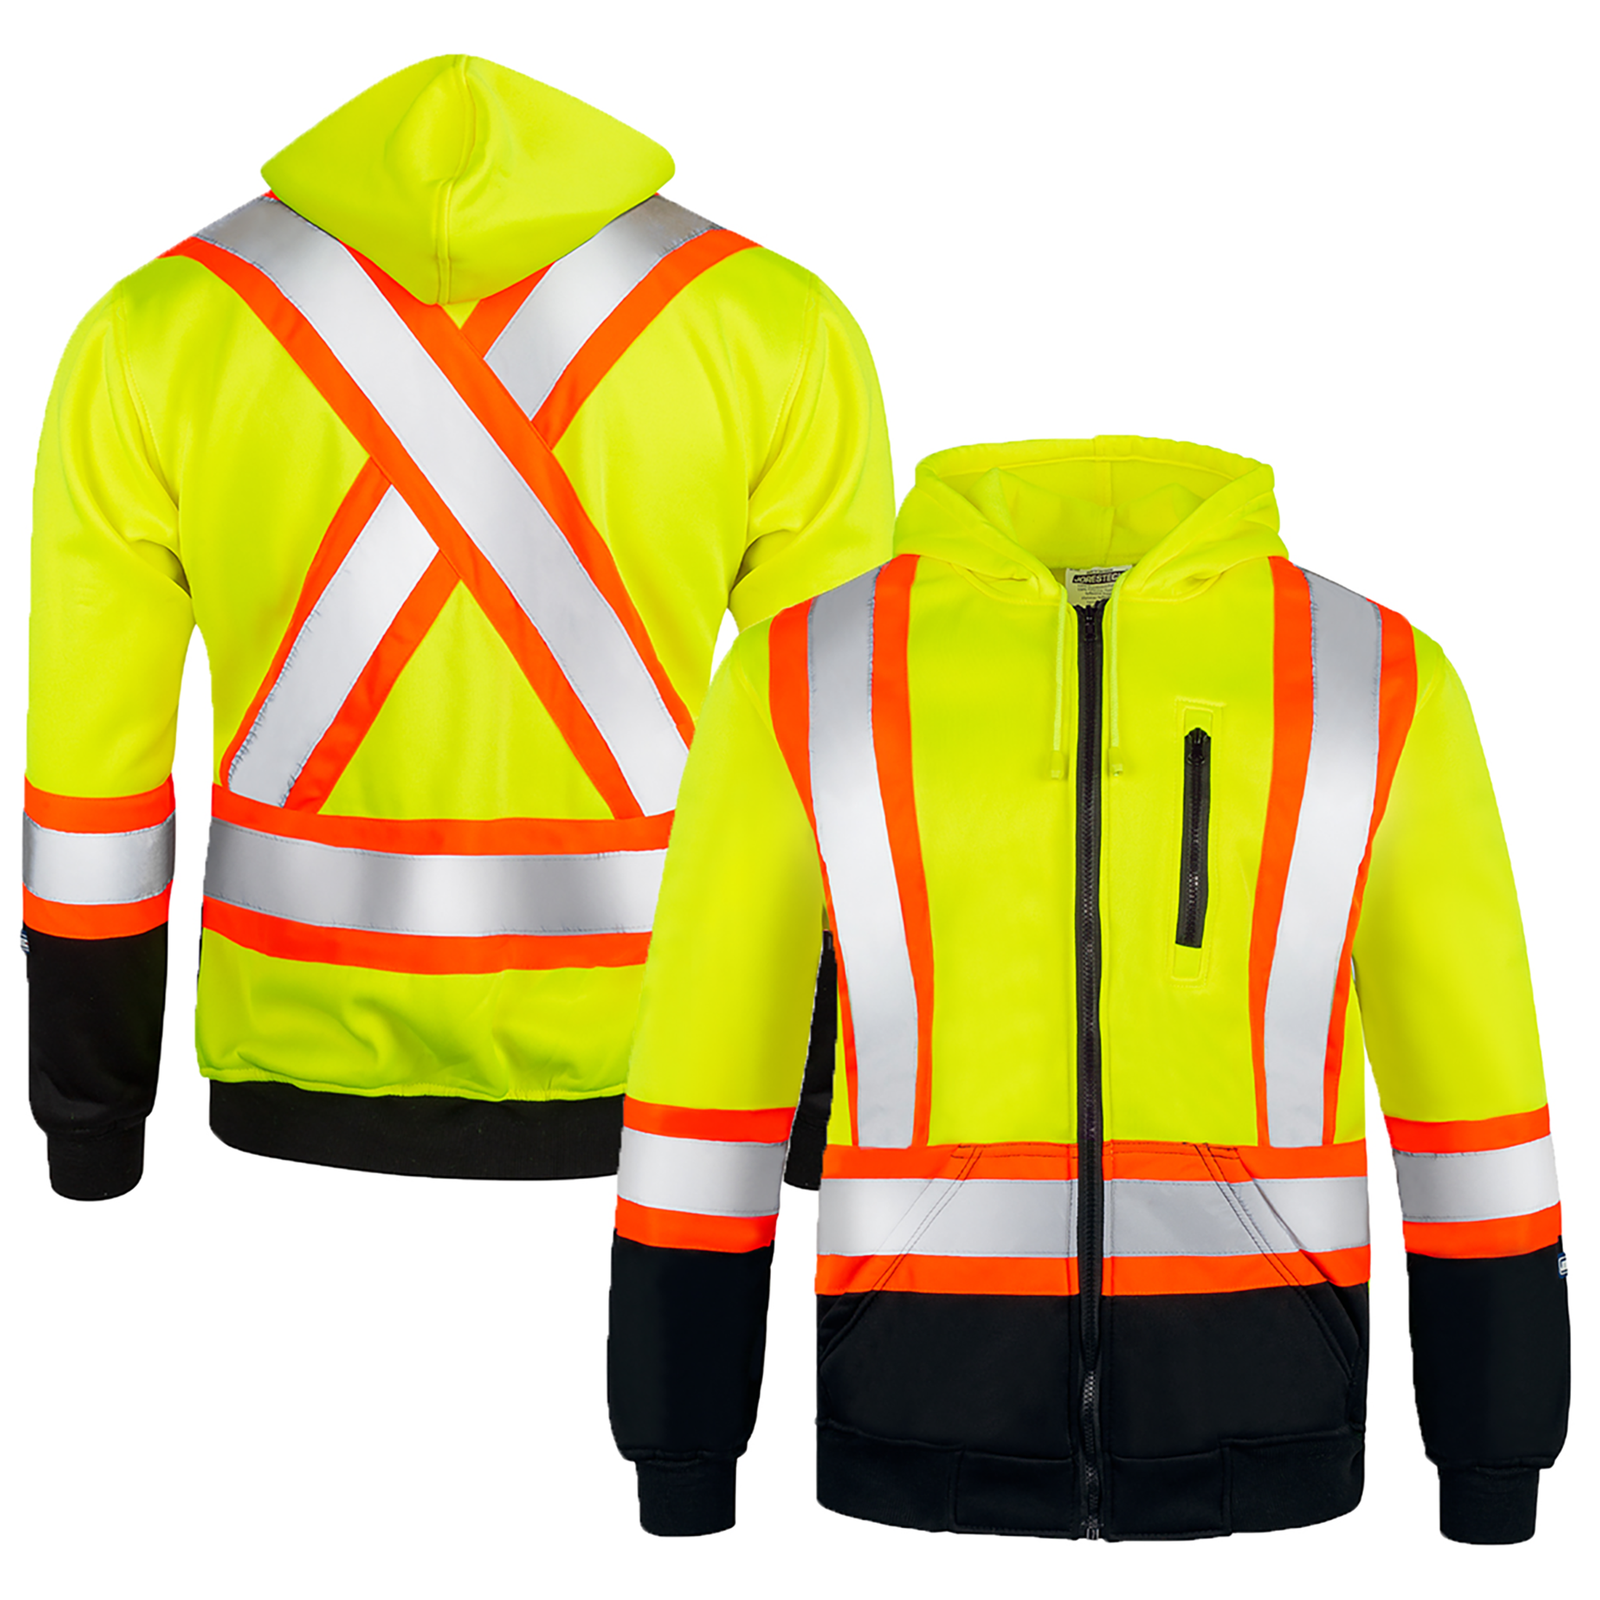 Front and back view of the hi vis yellow safety hooded sweatshirt with reflective stripes